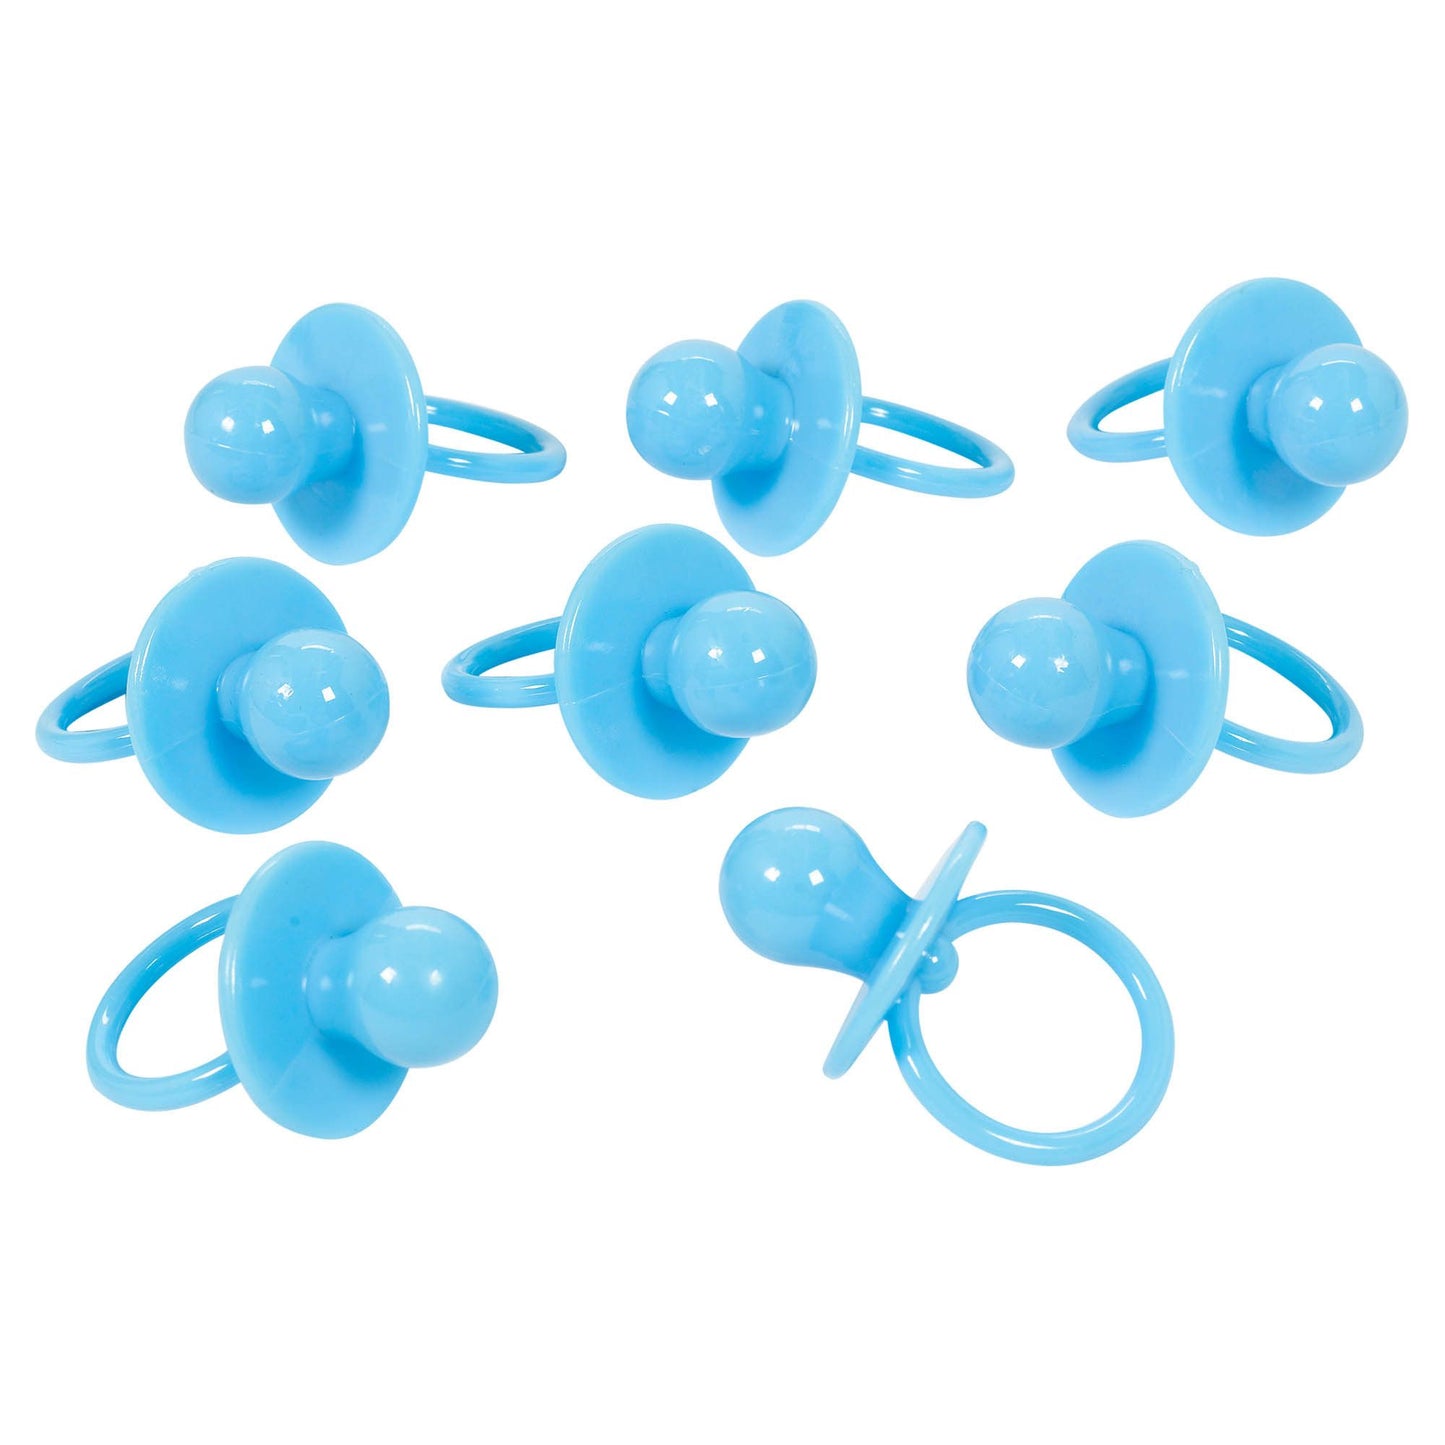 Large Pacifier Charms - Blue 8ct